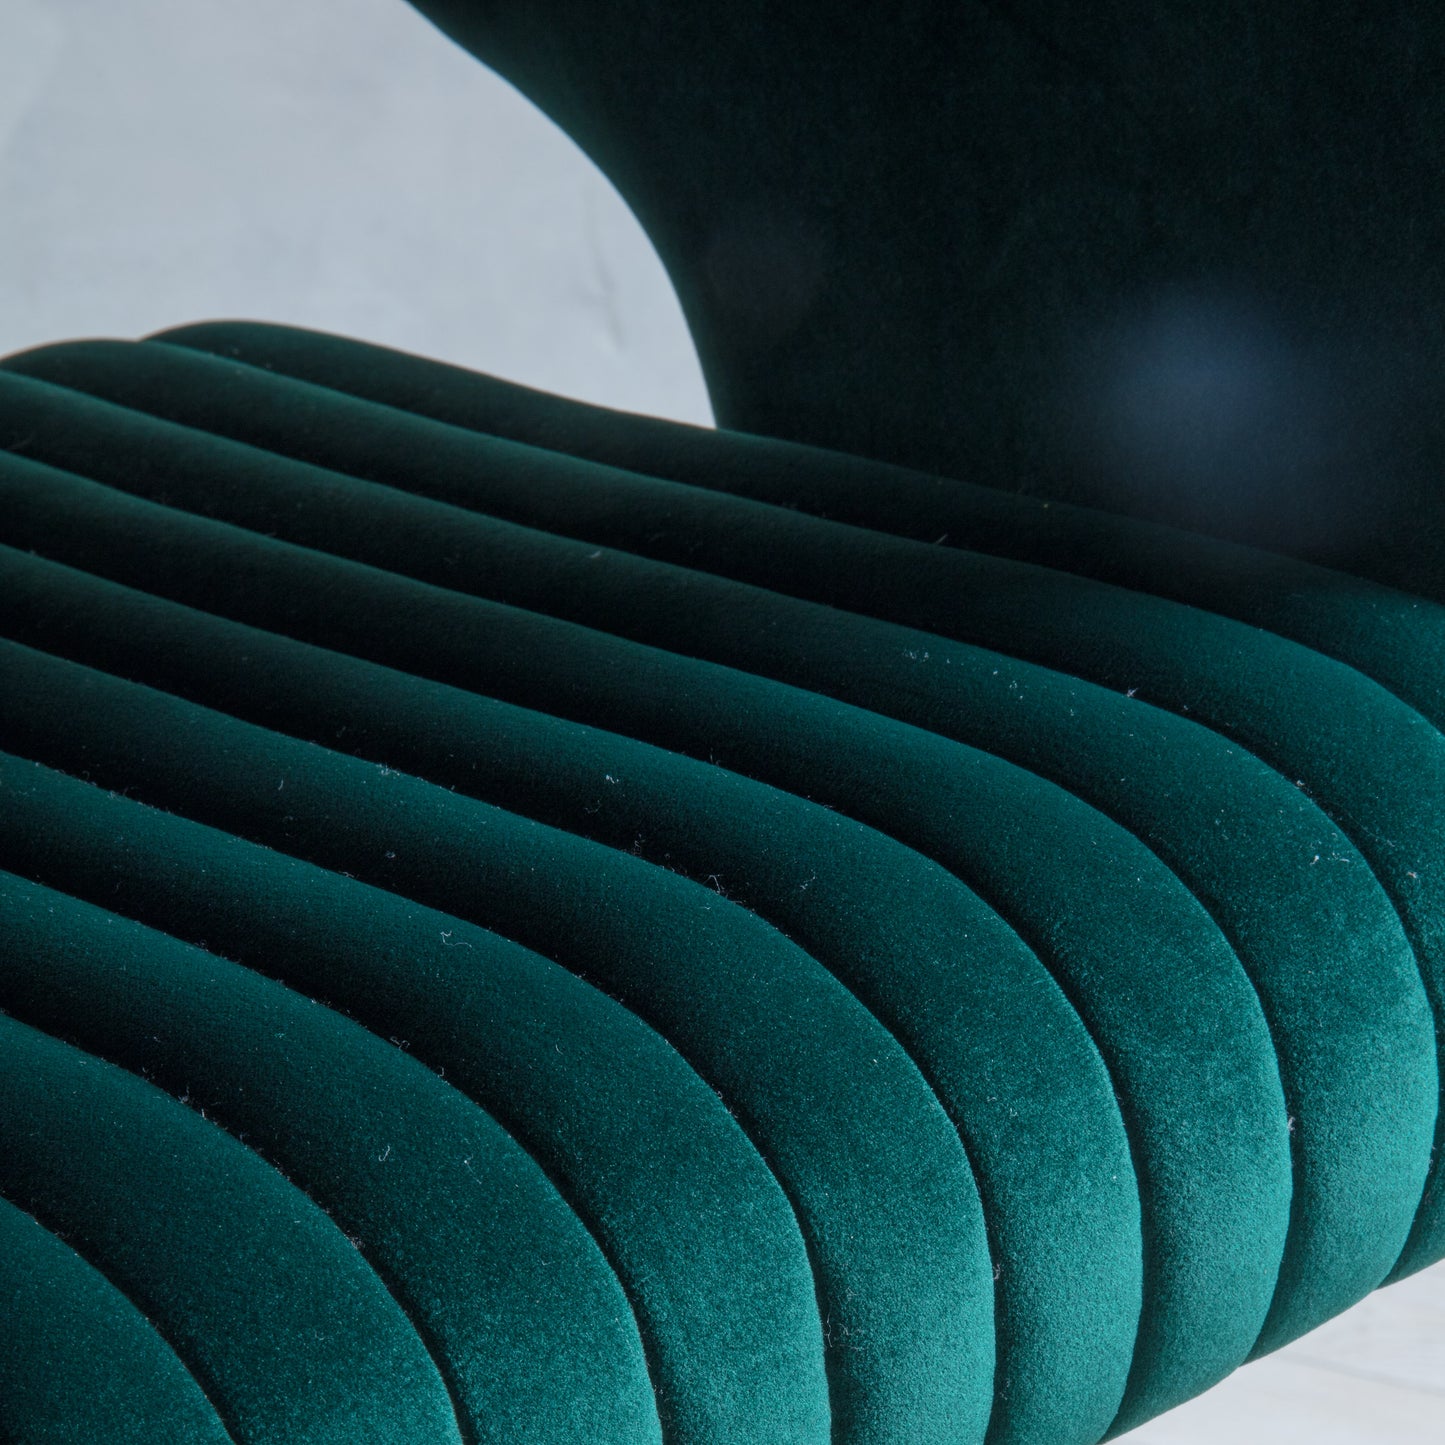 A close up of a Murray Swivel Chair Green Velvet from an online retailer specializing in interior decor and home furniture.